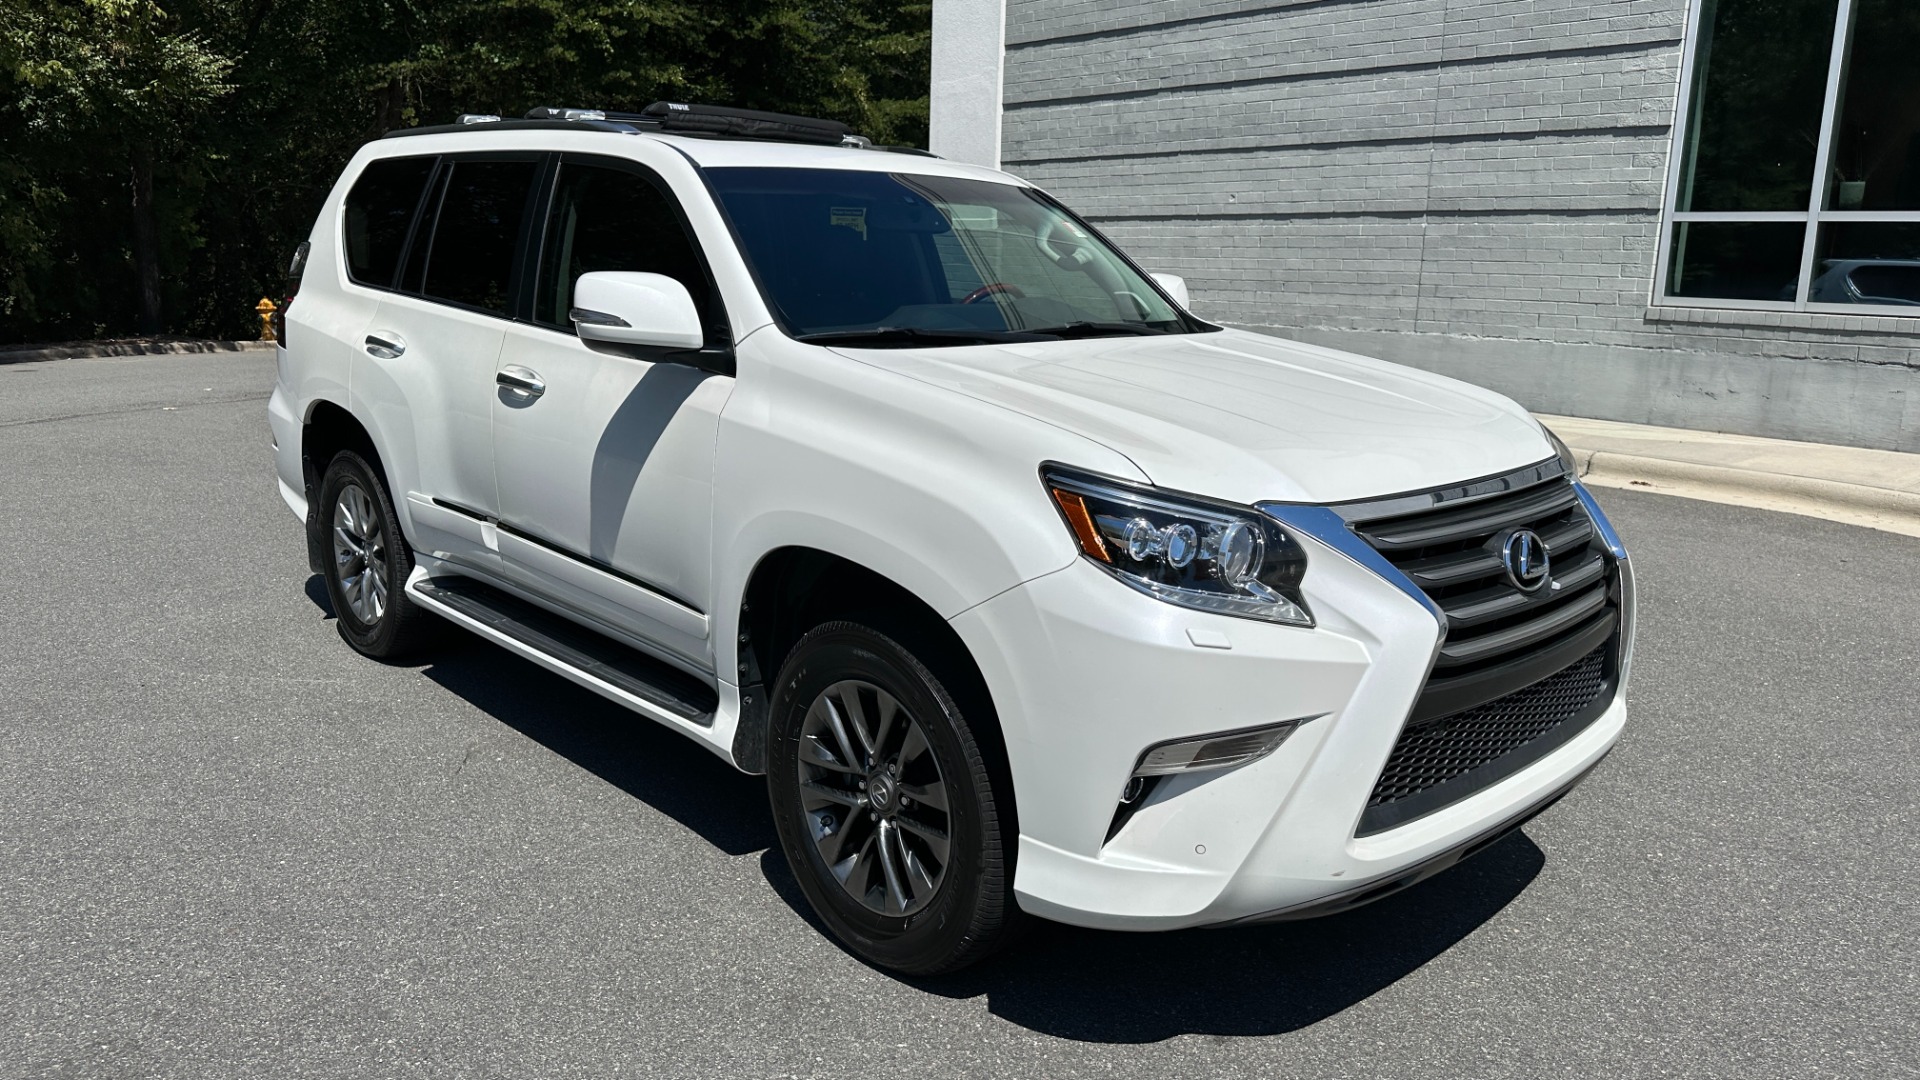 Used 2015 Lexus GX 460 LUXURY / MARK LEVINSON / ADJUSTABLE SUSPENSION / TOW HITCH / 3RD ROW for sale Sold at Formula Imports in Charlotte NC 28227 7